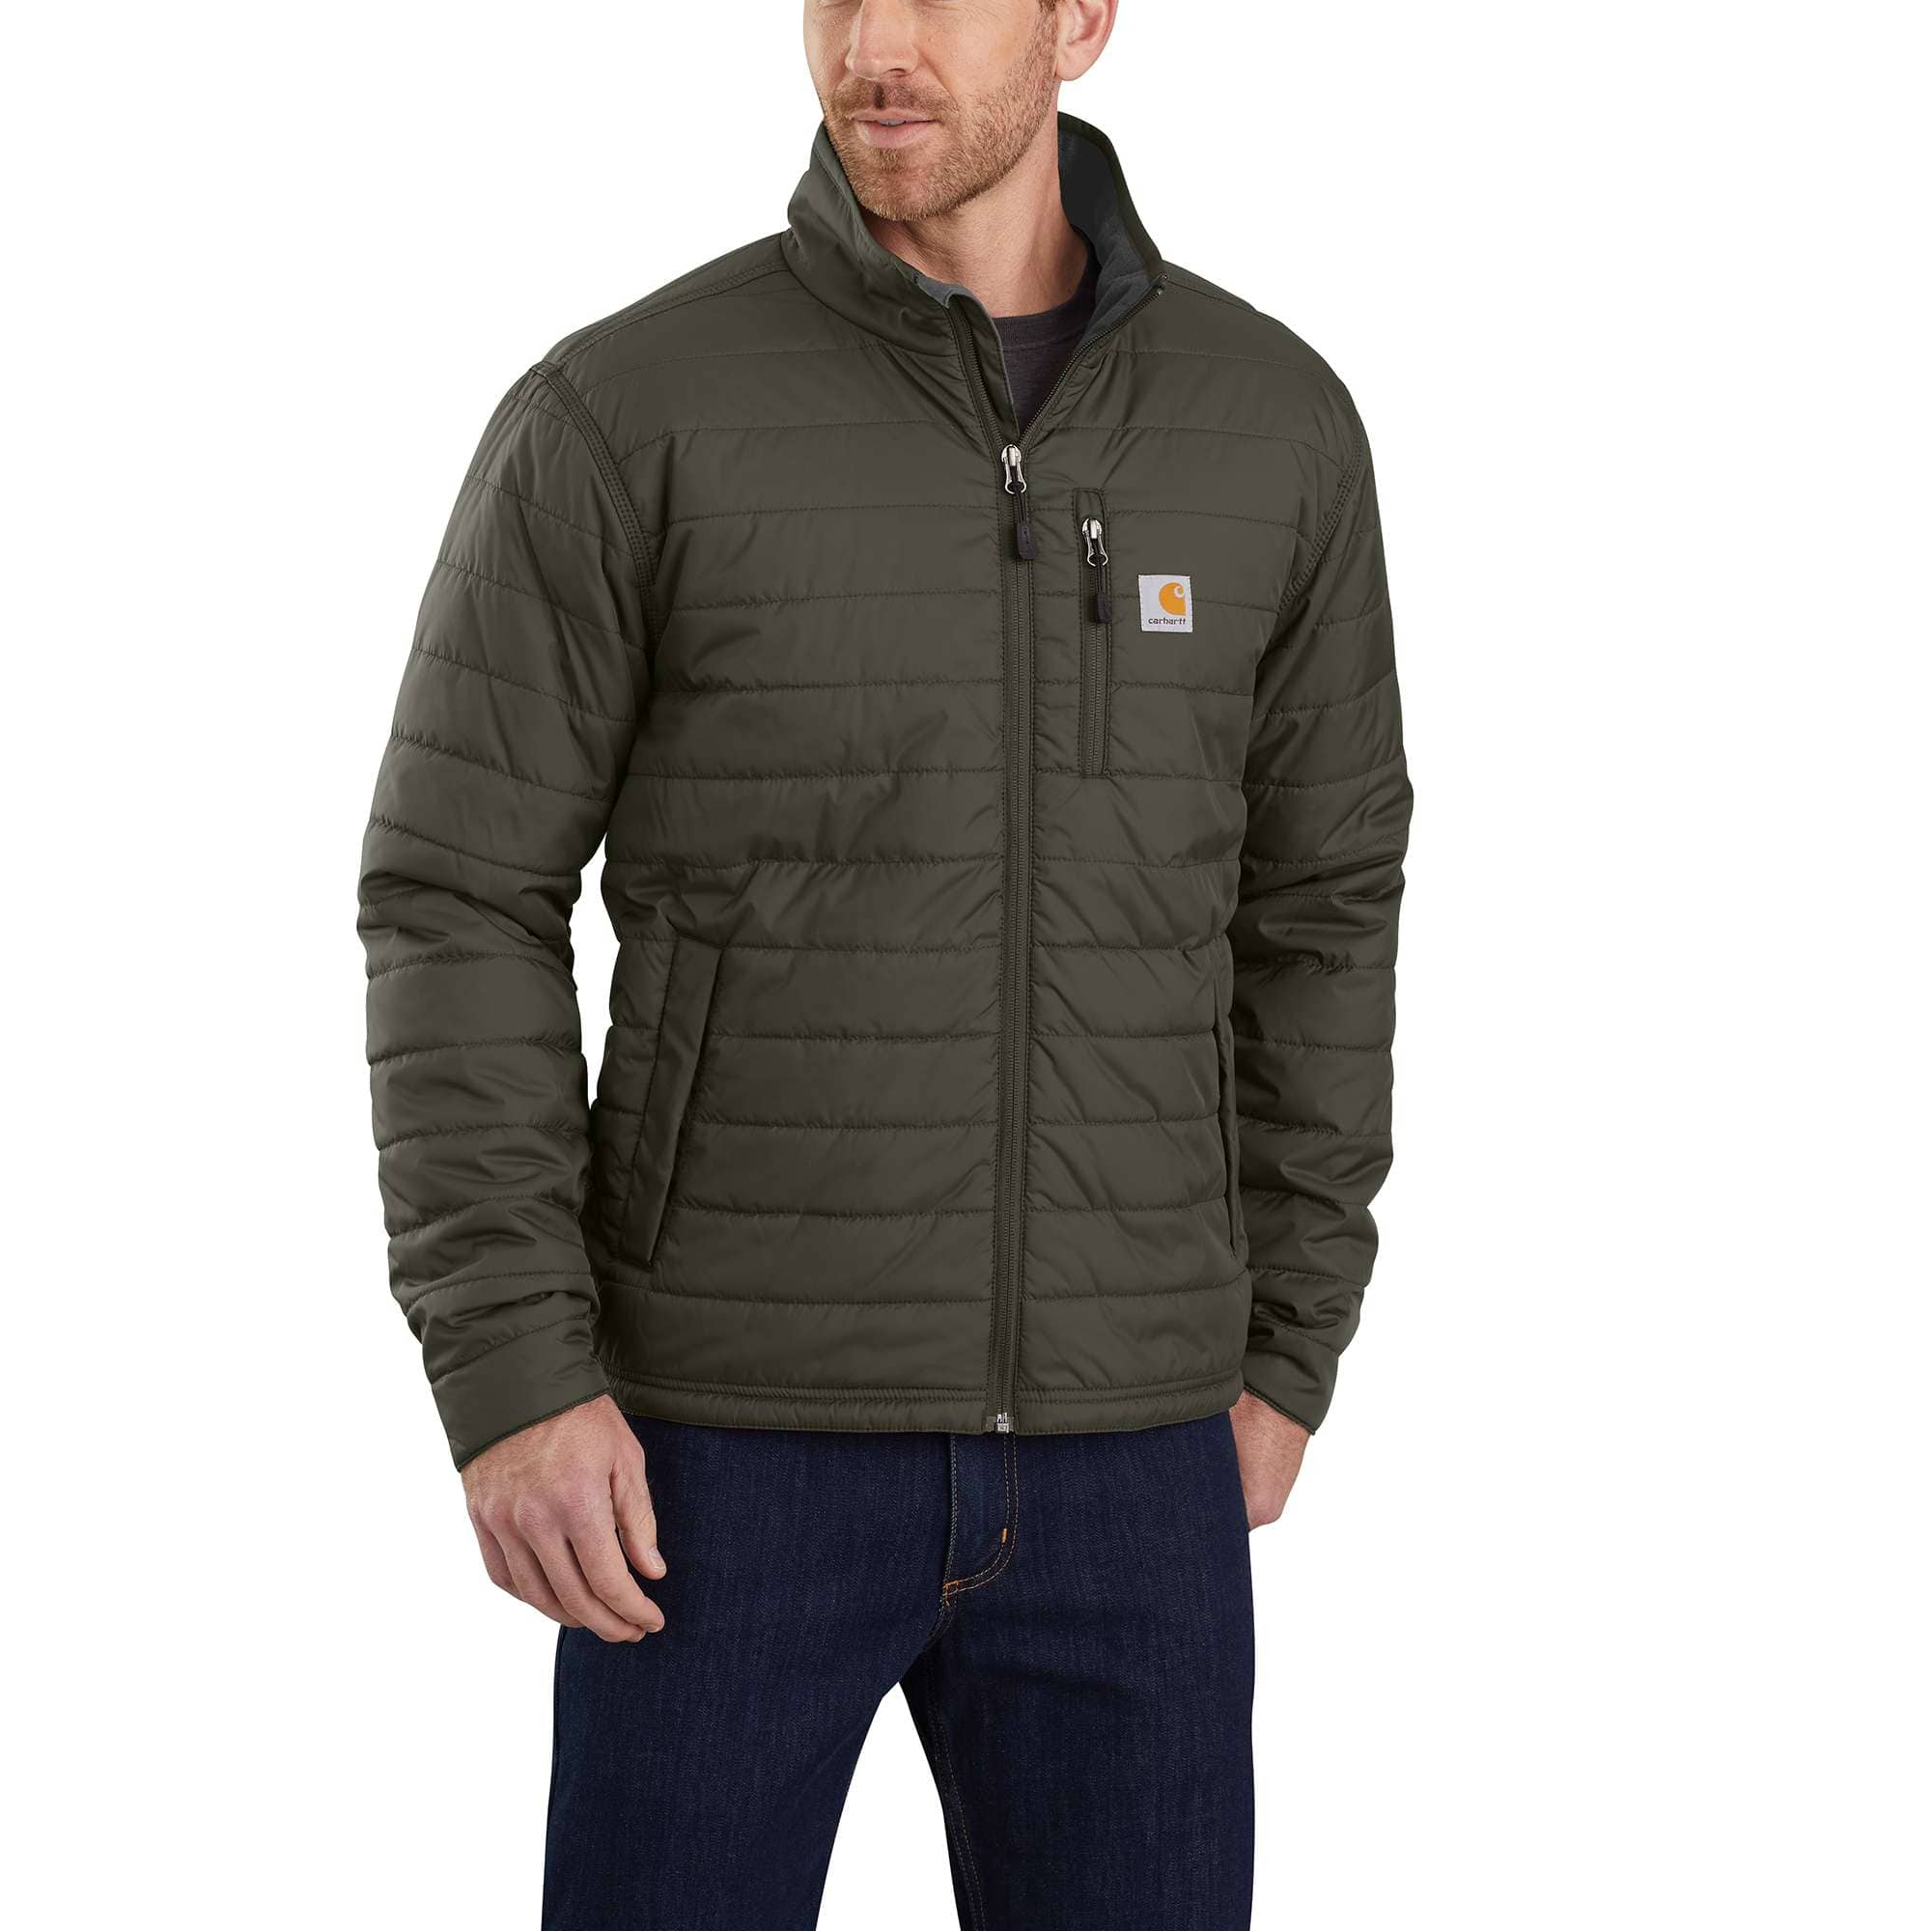 All Warmth Ratings | Carhartt